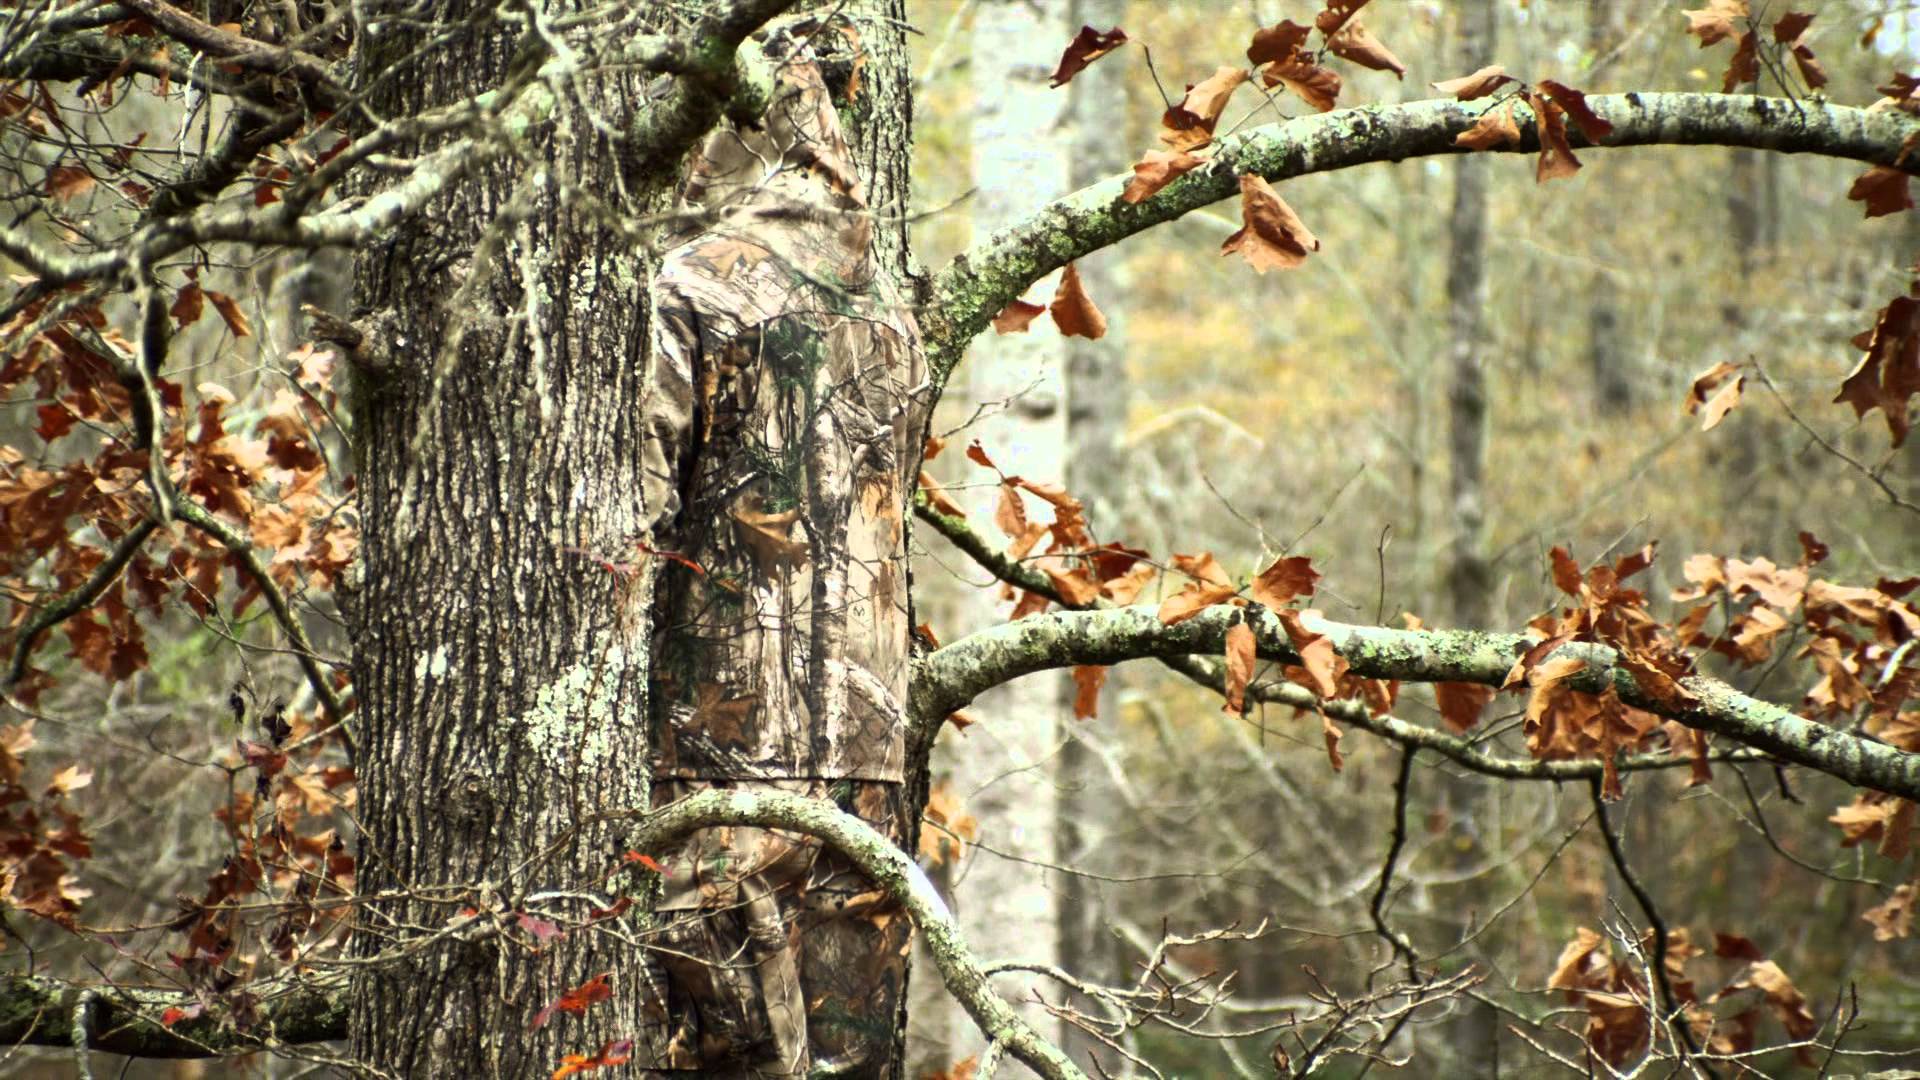 Realtree® Xtra Camouflage: It's All About You